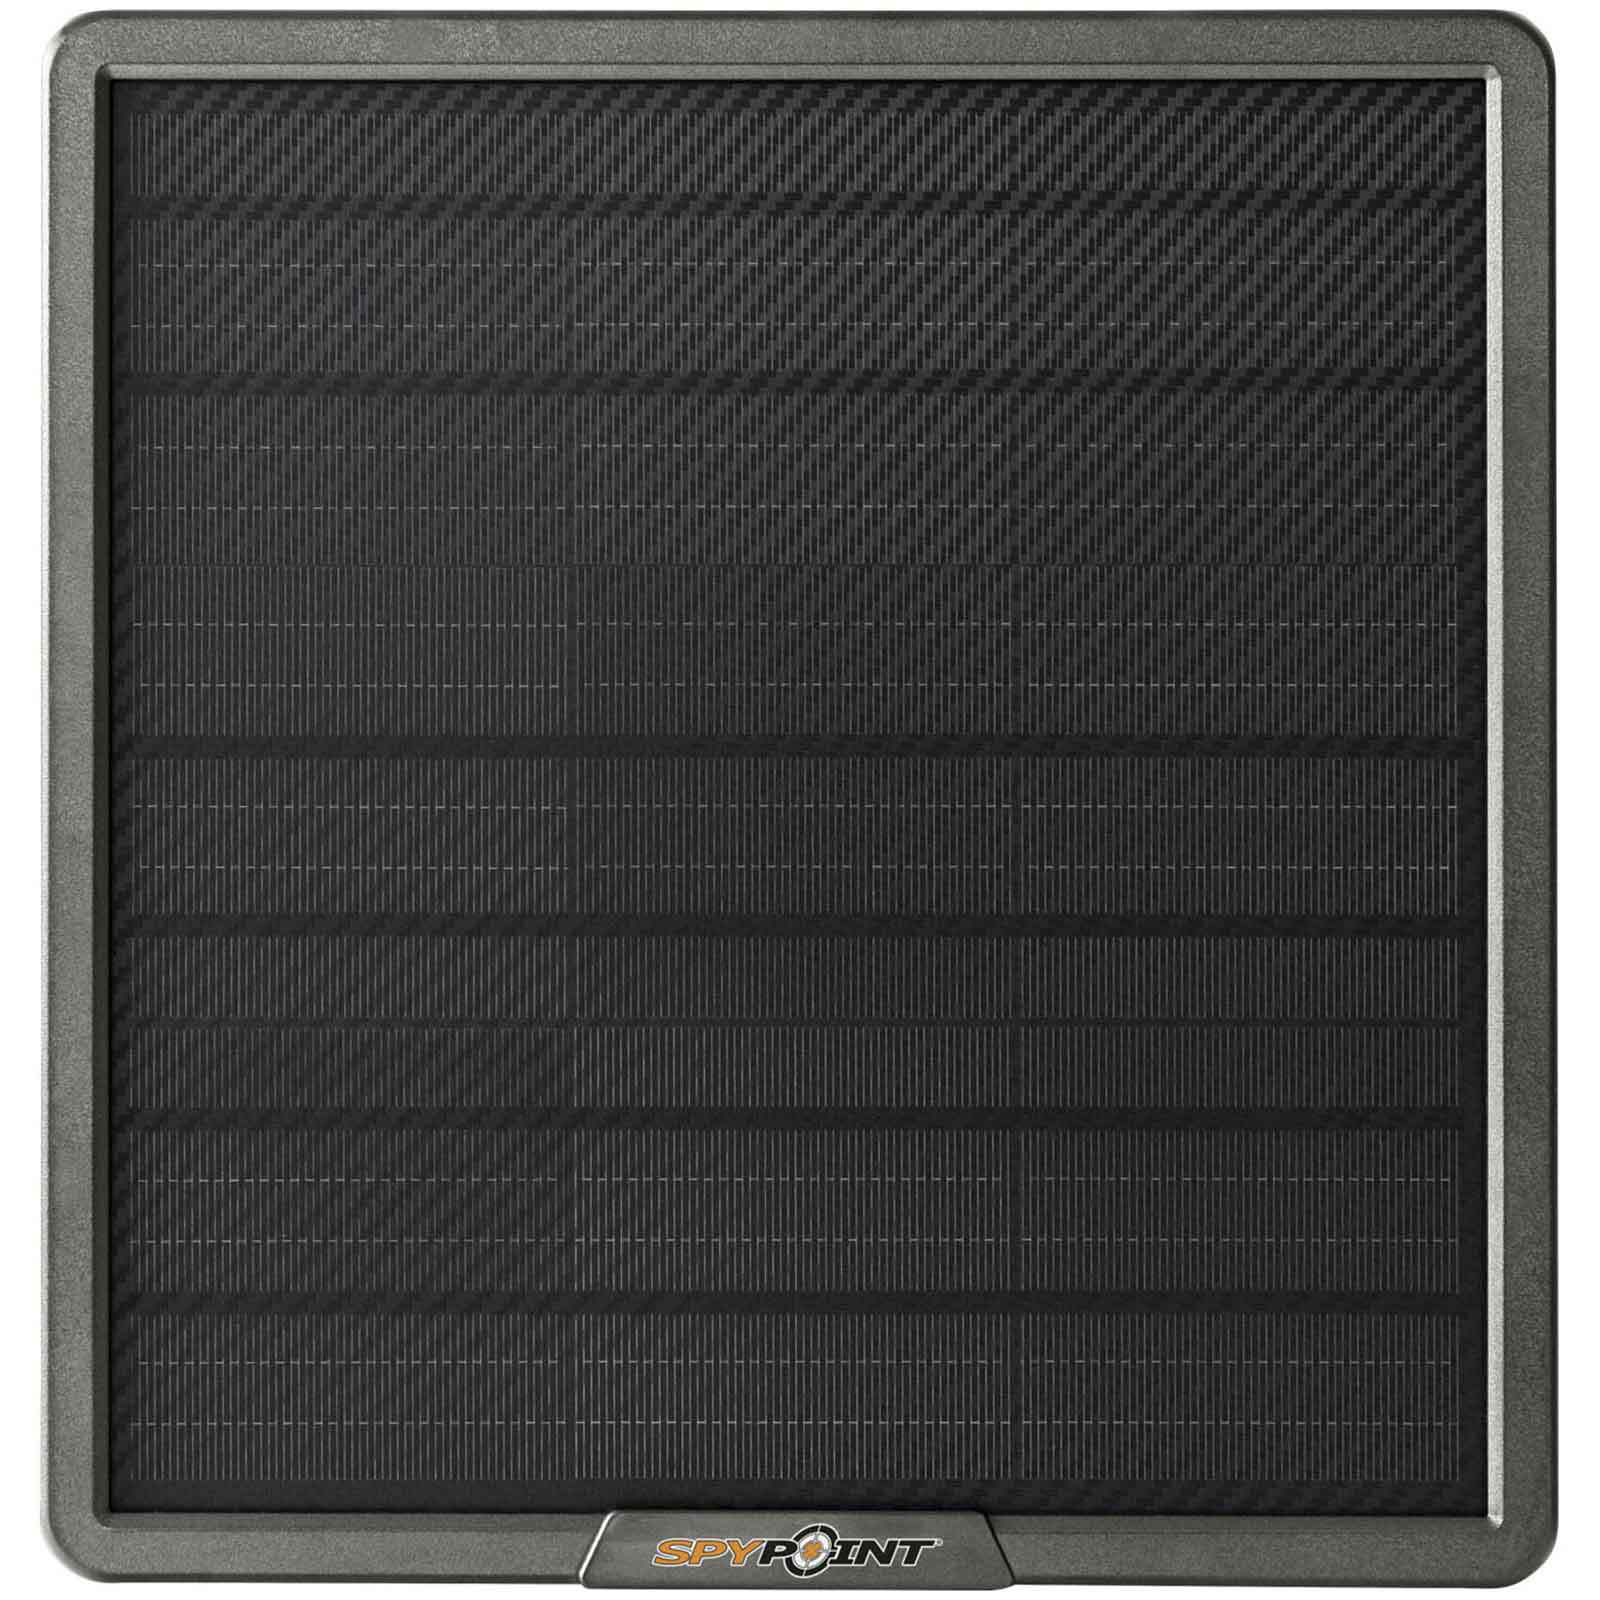 Spypoint Solar Panel SPLB-22 with Lithium Battery